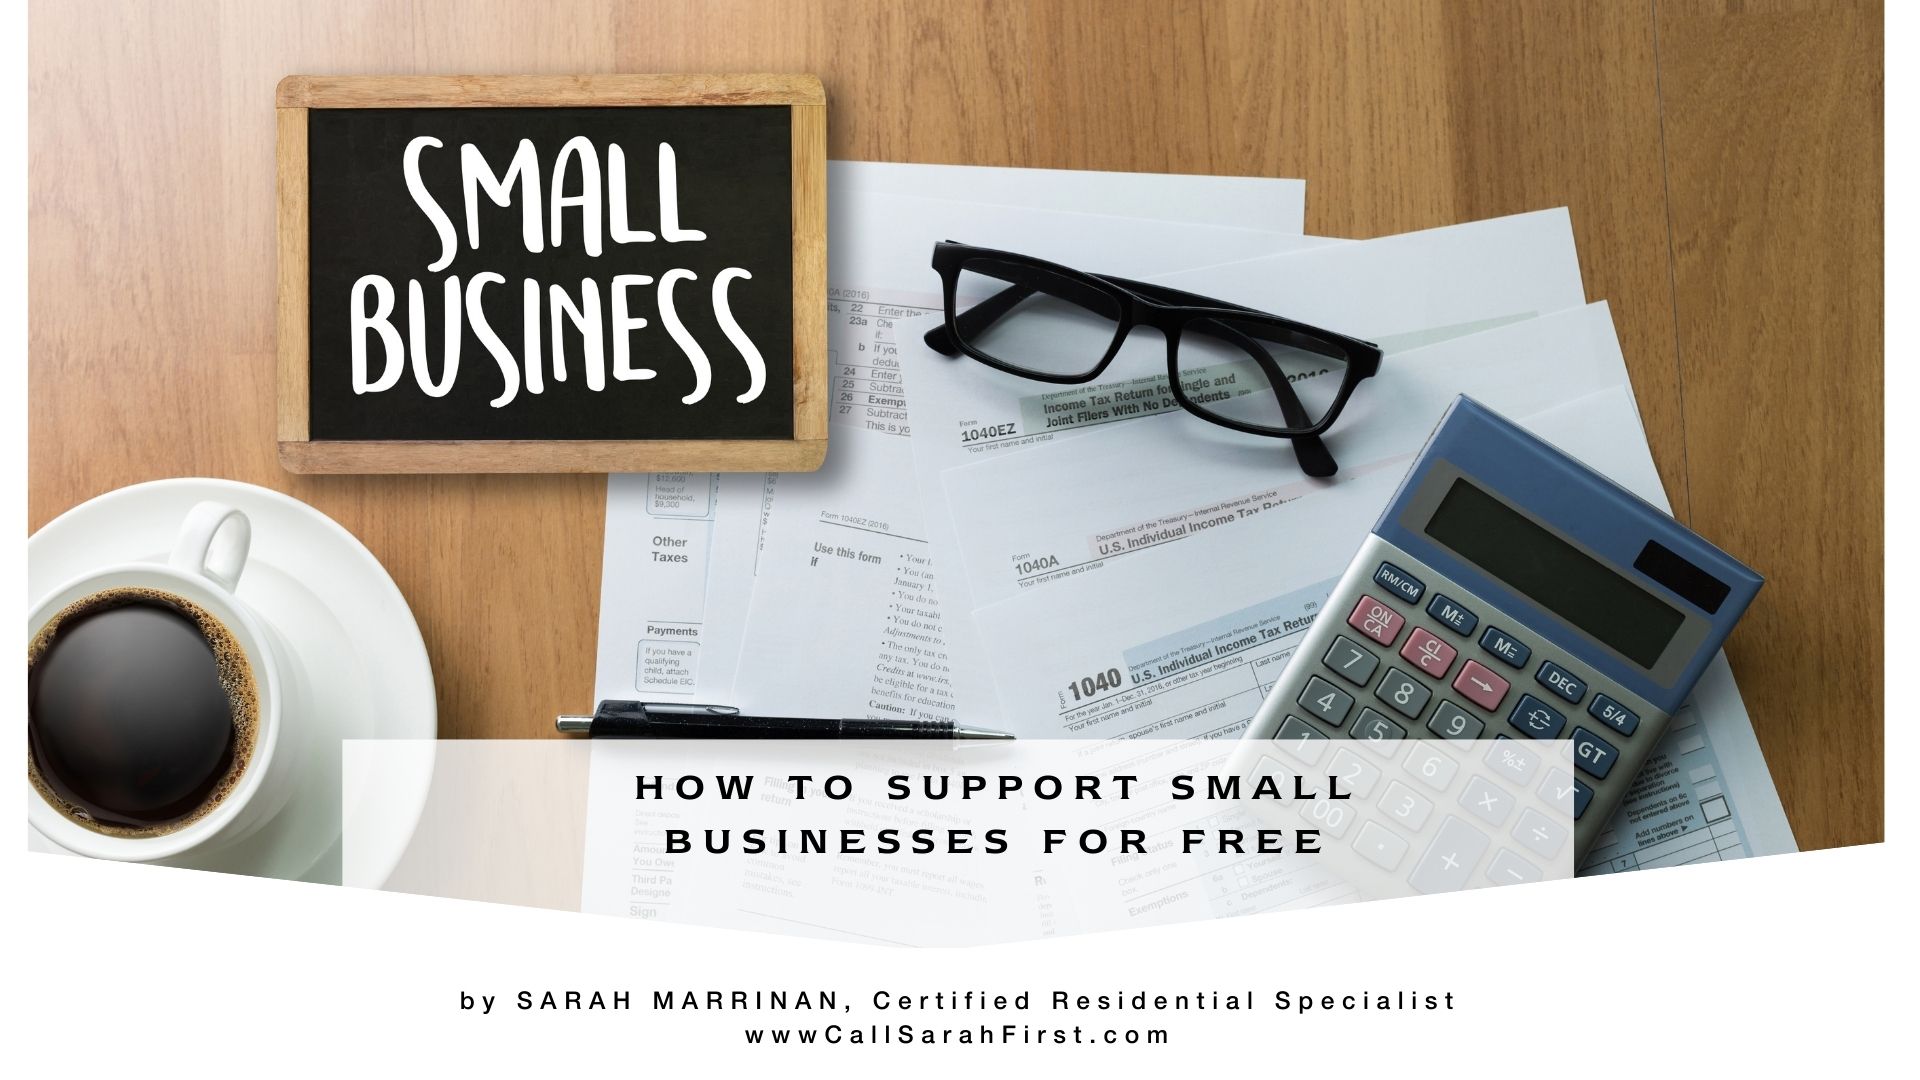 HOW TO SUPPORT SMALL BUSINESSES FOR FREE